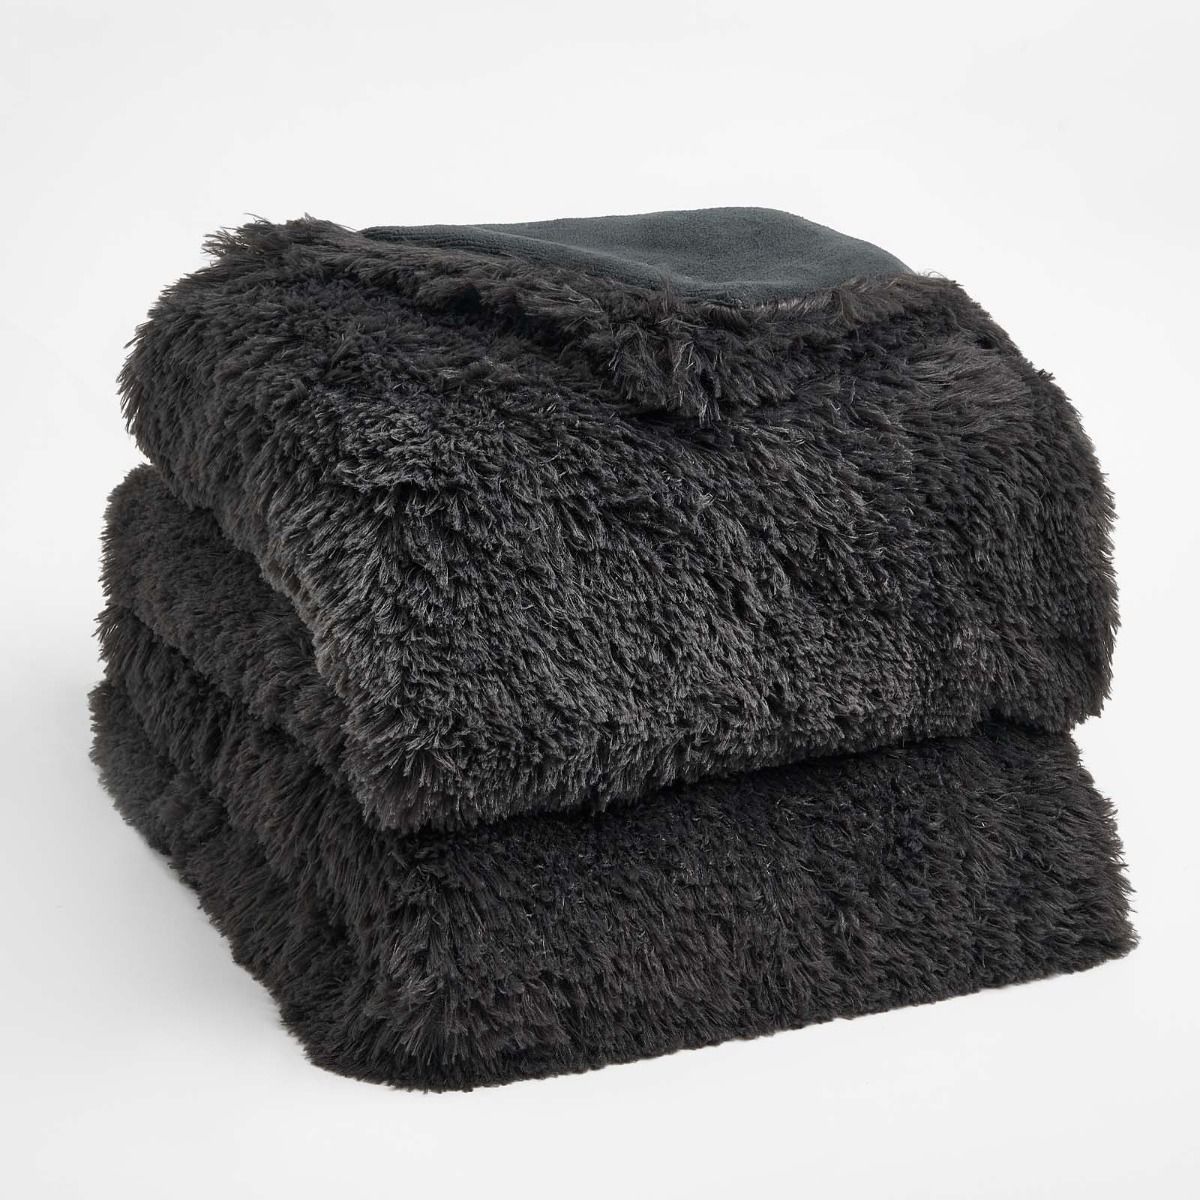 Sienna Fluffy Throw, 60 x 80 inches - Charcoal